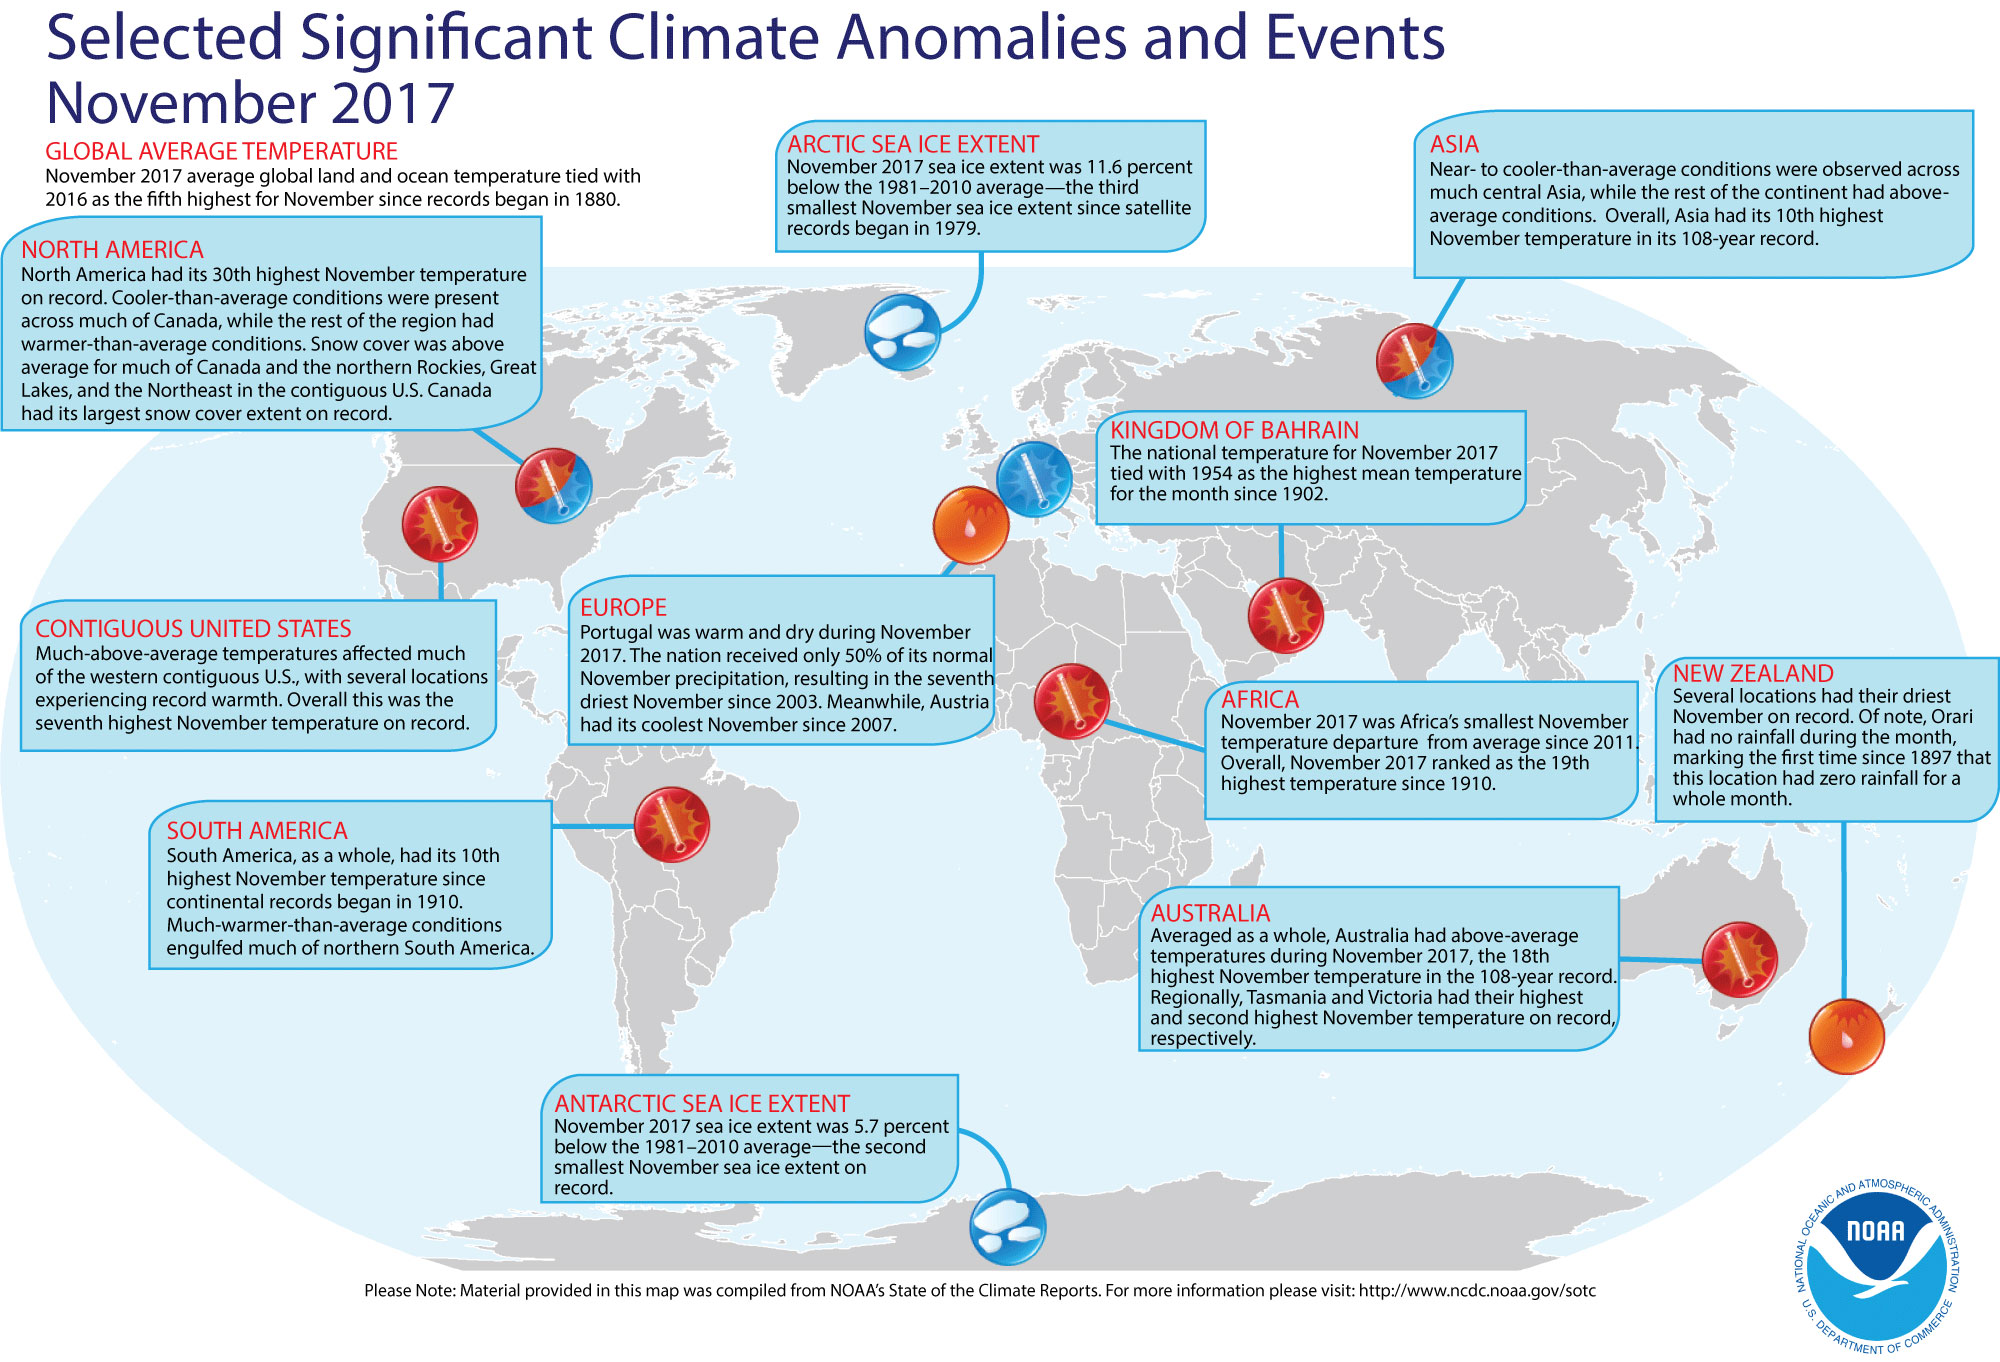 Map:These are some of the noteworthy climate-related events that occurred around the world during November and the year to date.